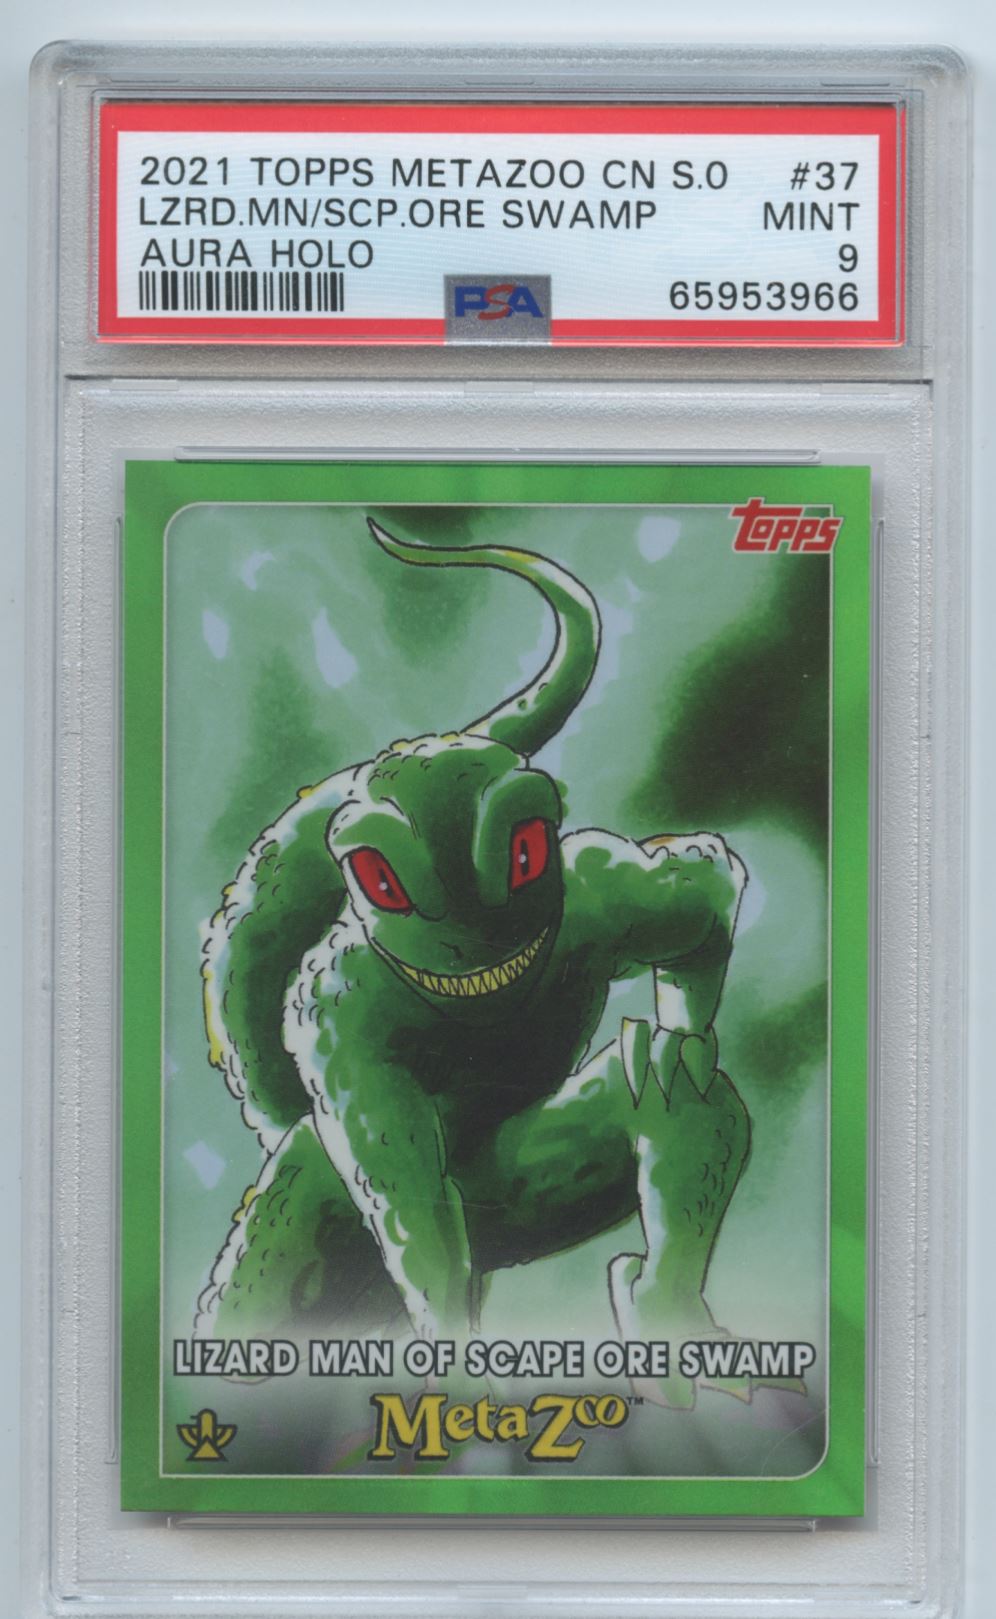 2021 Topps Metazoo Cryptid Nation Series Zero Lizard Man Of Scape Ore Swamp #37 card front image